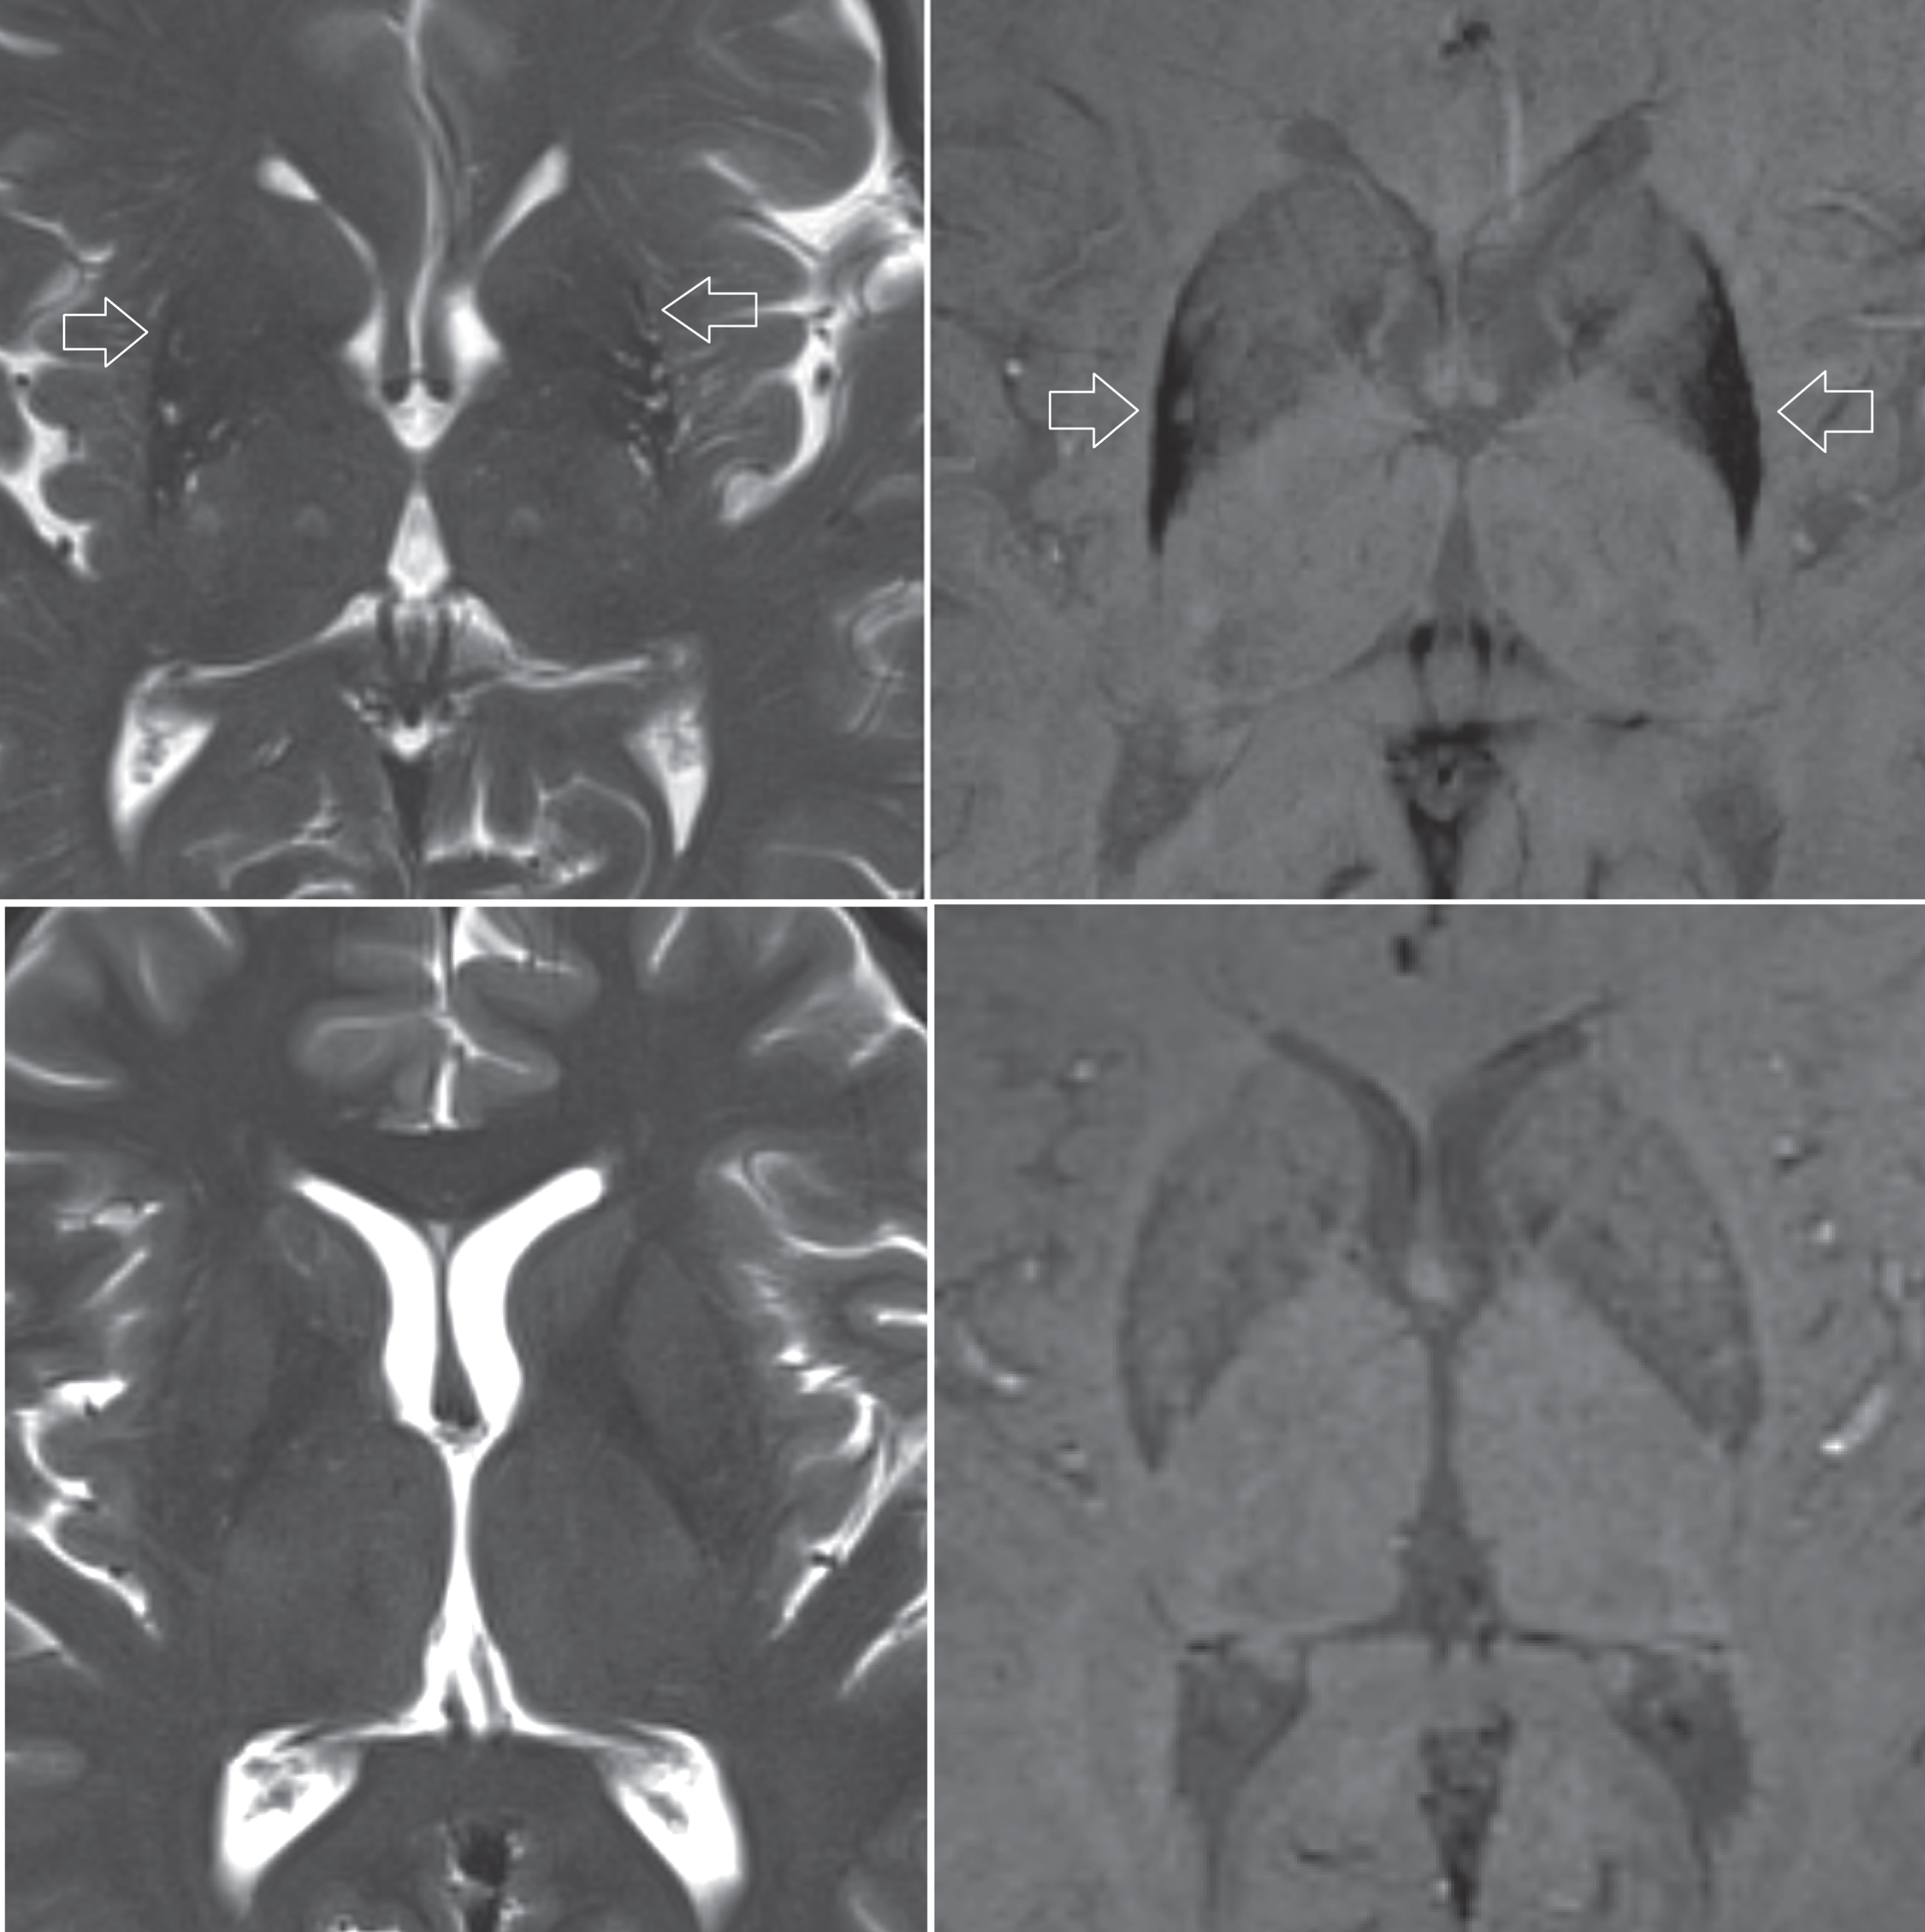 Upper row, patient diagnosed with MSA. Atrophy of the putamen can be depicted on the T2-weighted sequence (left image), while pronounced susceptibility changes of the putamen is better seen on a SWI sequence (right image). Lower row, T2-weighted and SWI images of a healthy control subject for comparison.